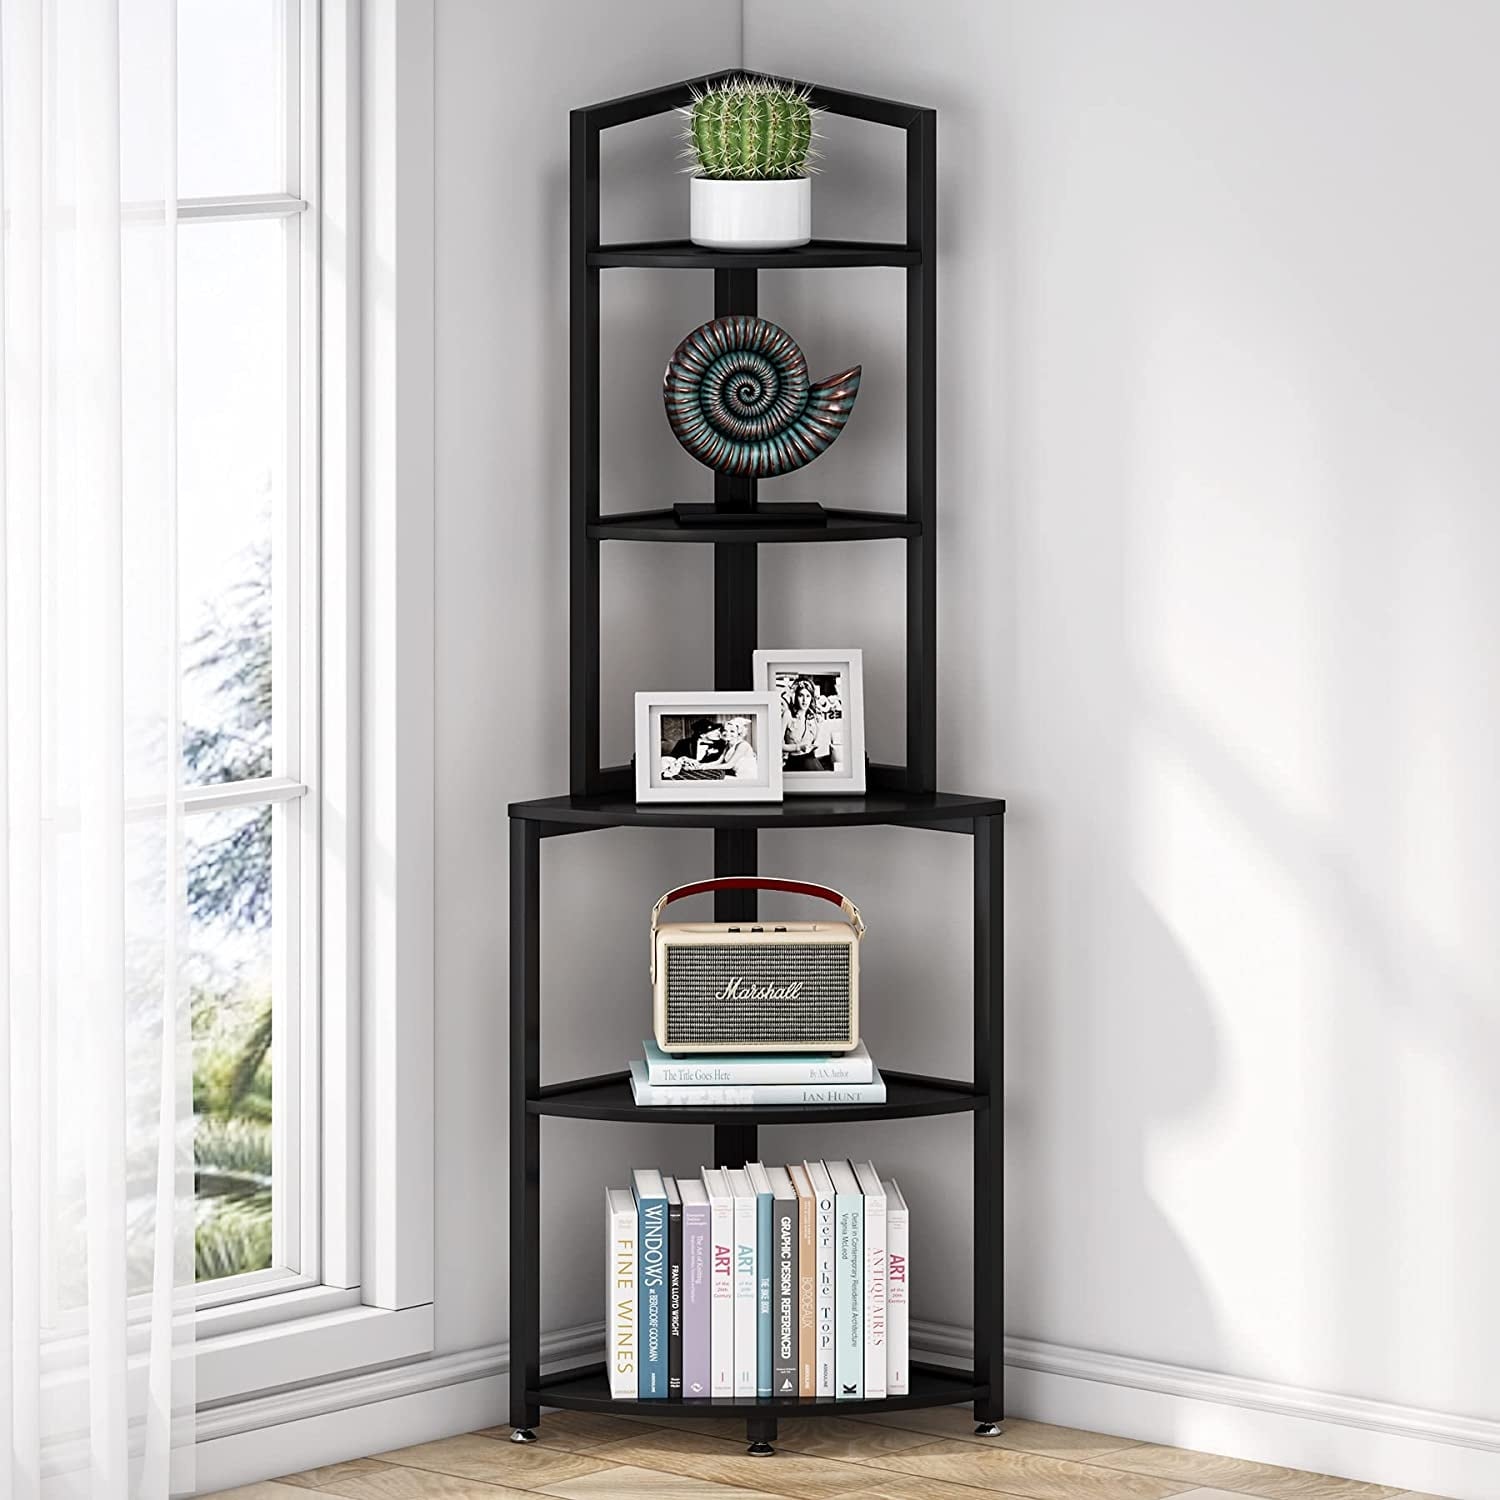 https://ak1.ostkcdn.com/images/products/is/images/direct/33bf2d6d5a8d1032adecb3d91c06aee57c7af9de/5-Tier-Corner-Shelf%2C-60-Inch-Bookcase-for-Living-Room%2C-Industrial-Corner-Storage-Rack-Plant-Stand-for-Home-Office.jpg